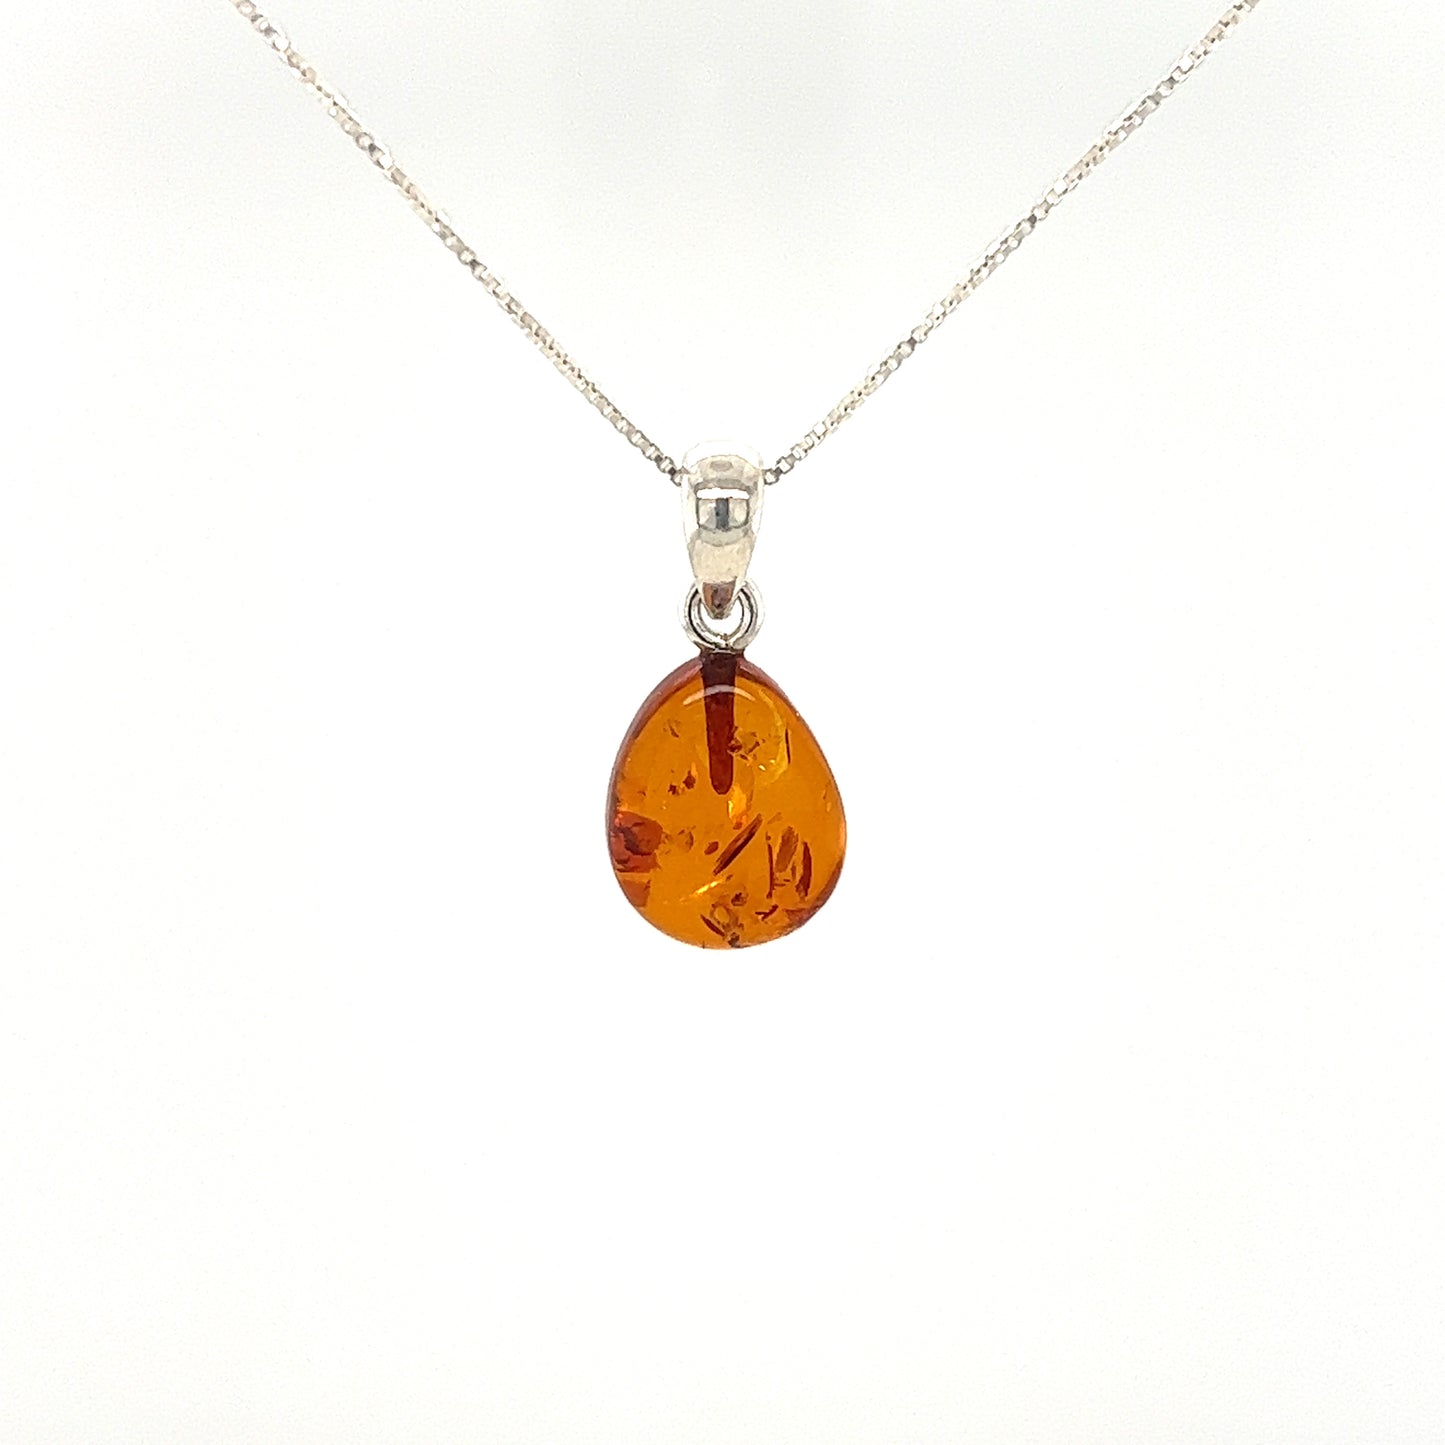 Super Silver's Teardrop Amber Pendant, with a minimalist look, in sterling silver.